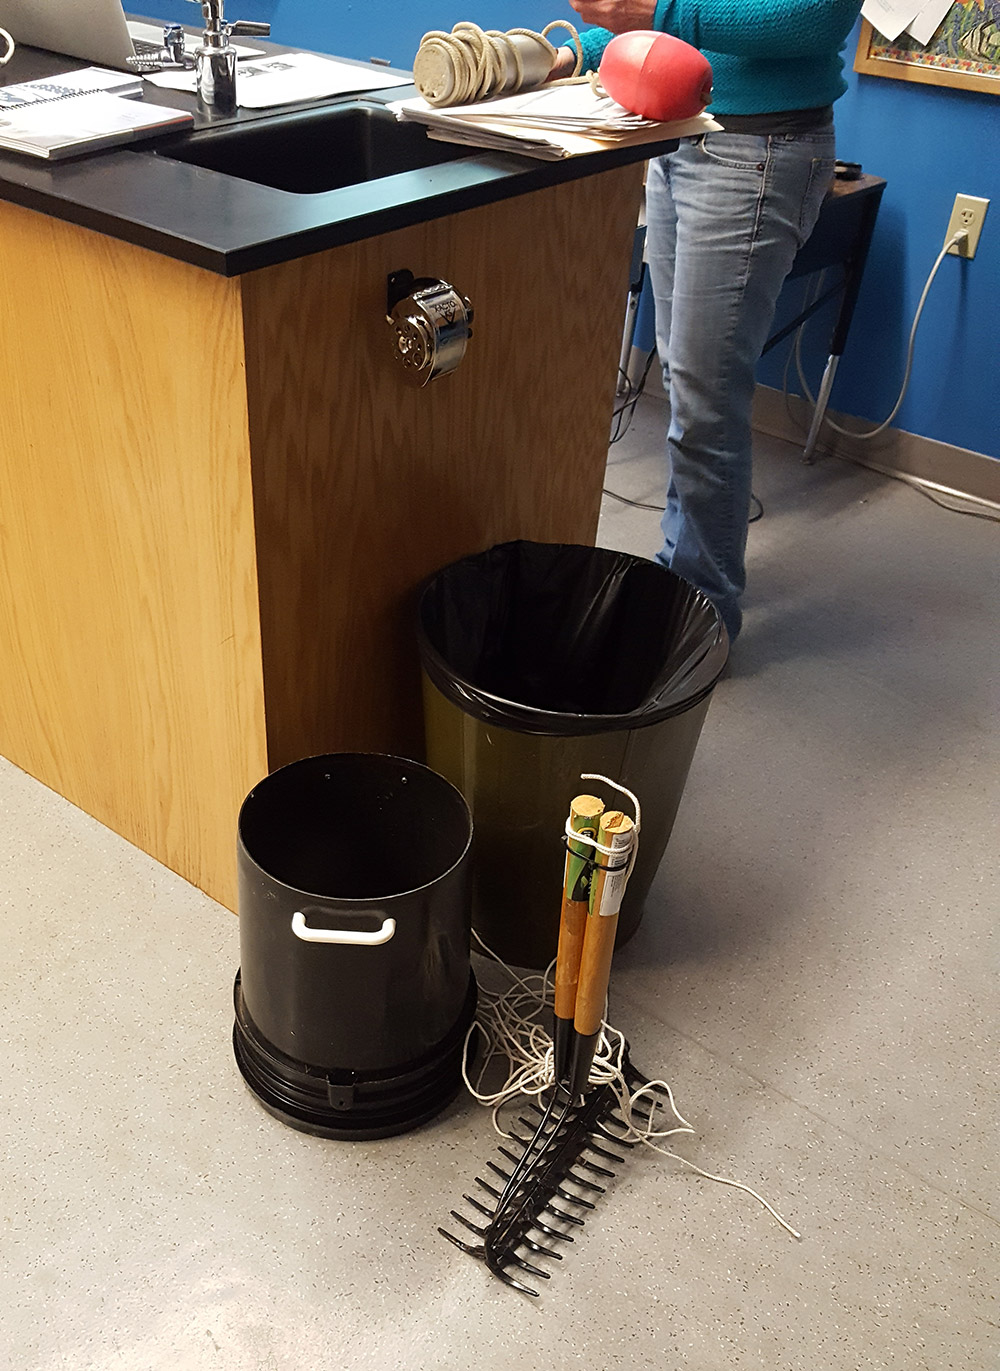 A bucket periscope and a modified grapple Denise Blanchette brought to the class. The HES 7th Graders will build replicas of these for their fieldwork.